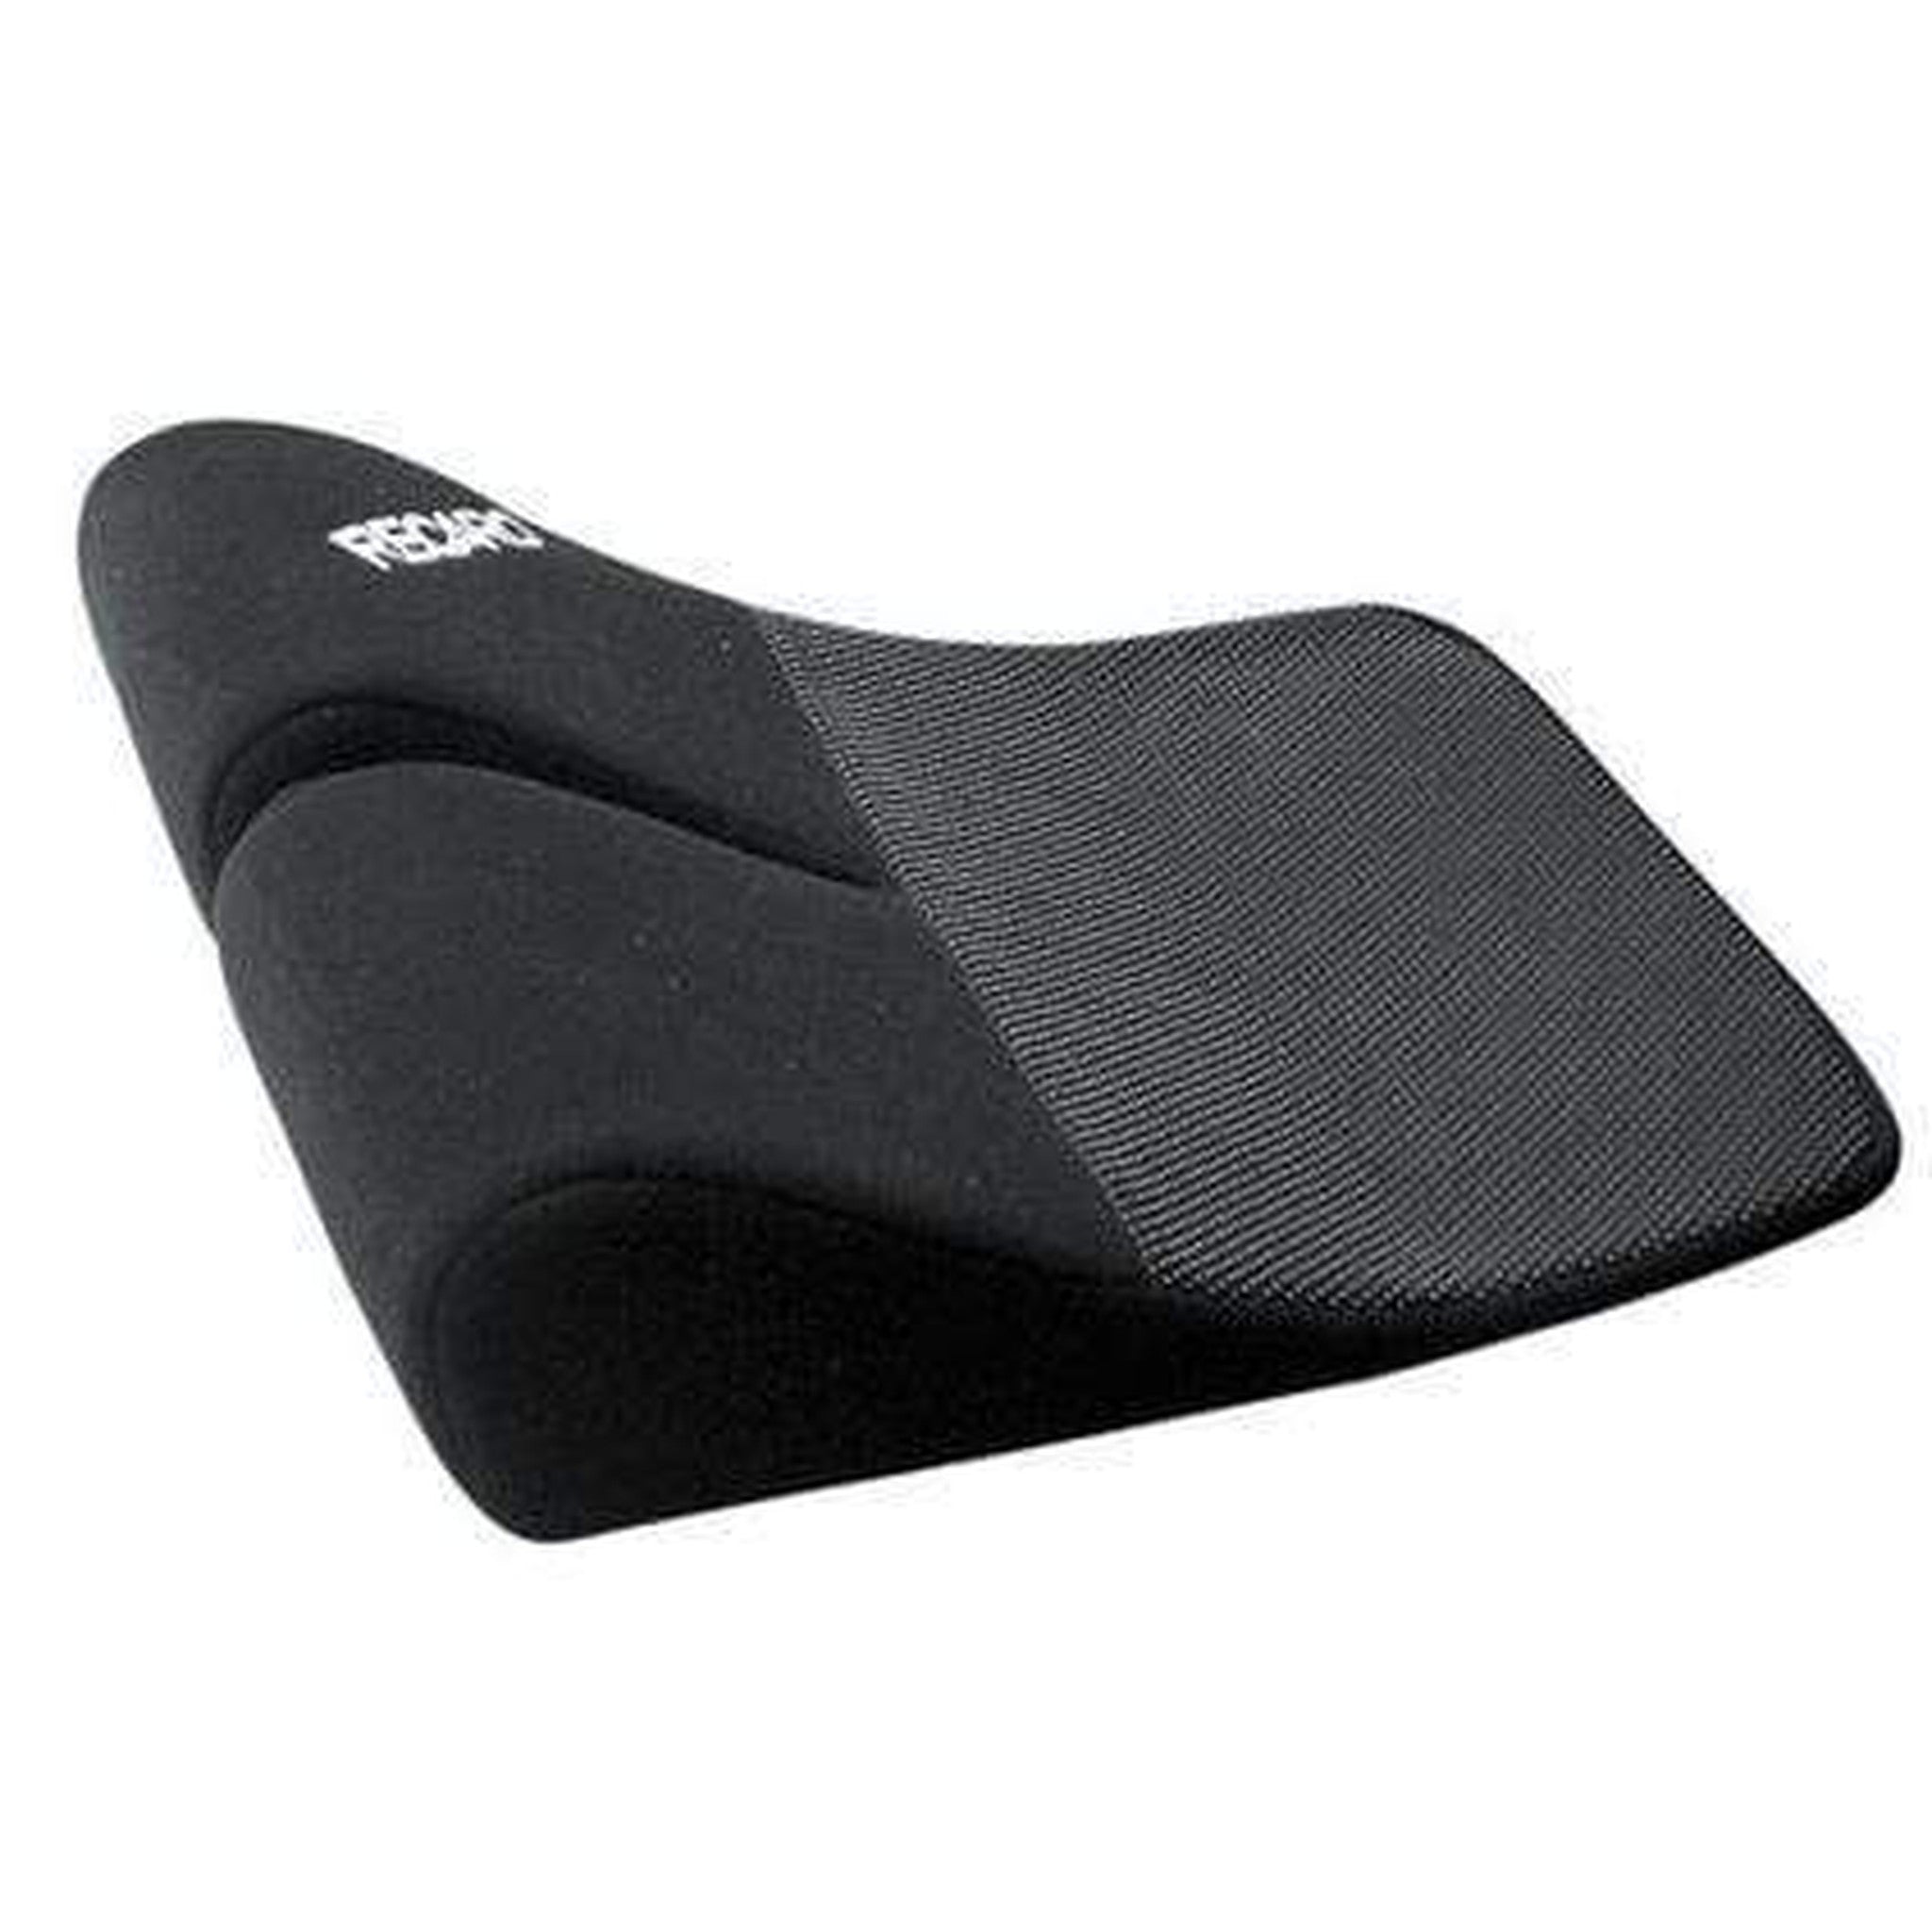 http://www.importimageracing.com/cdn/shop/products/Recaro-Extra-Cushion-for-Profi-SPARacer-SPGPro-Racer-SPG-55mm-Height-Black-Velour_20623b65-592c-45db-9c93-10a39e1eef72.jpg?v=1629333814